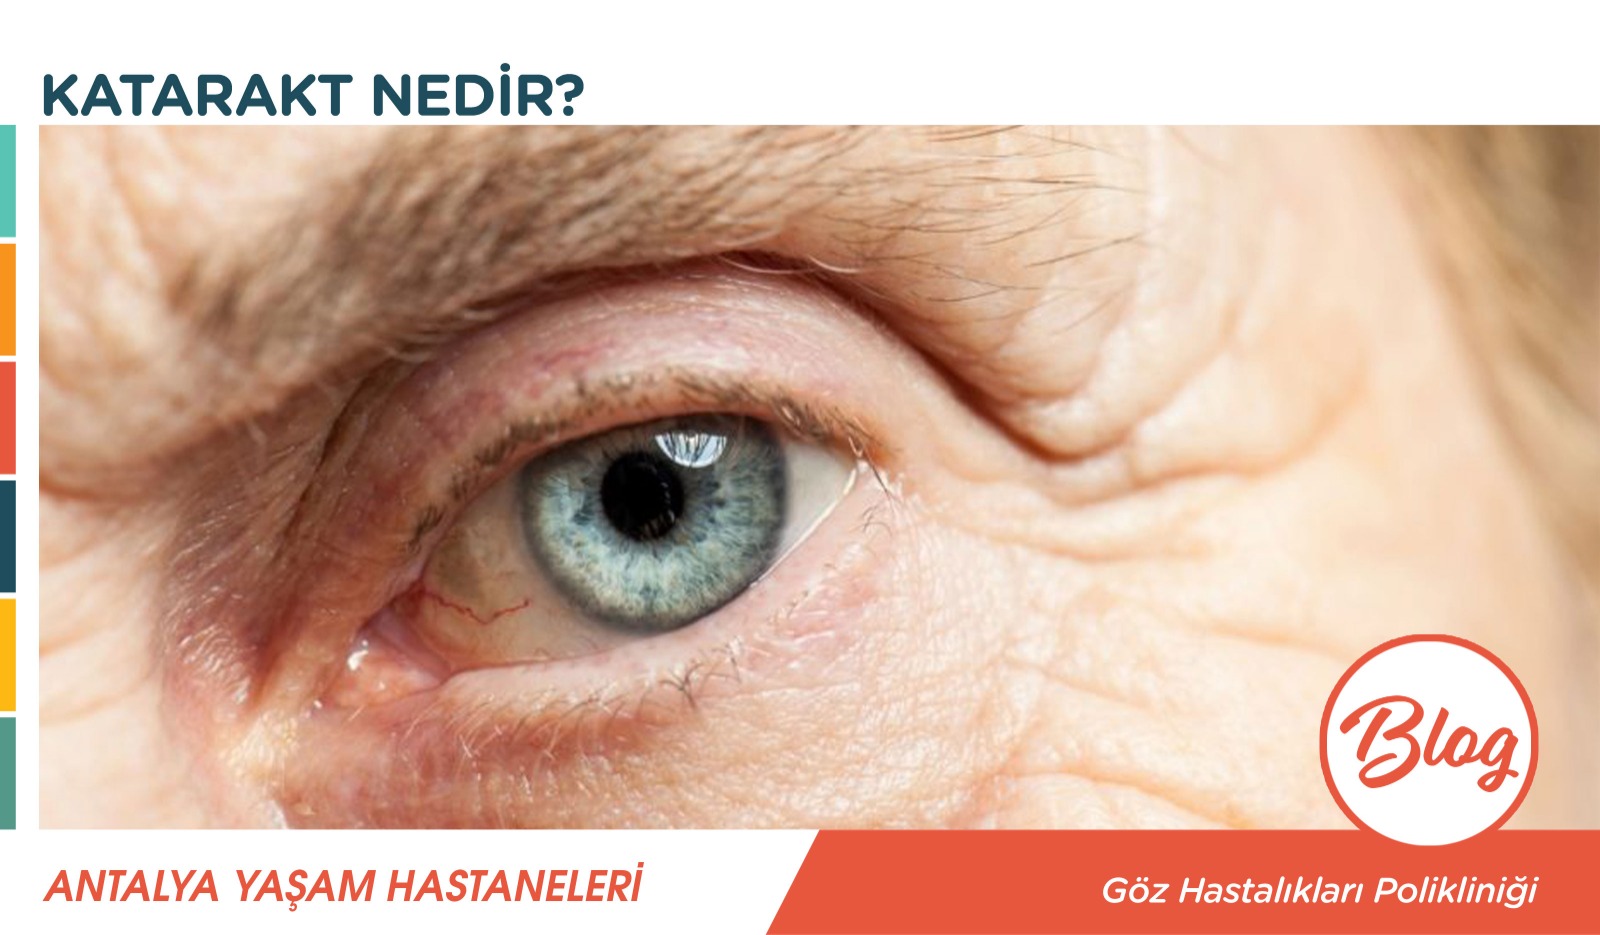 What is cataract?